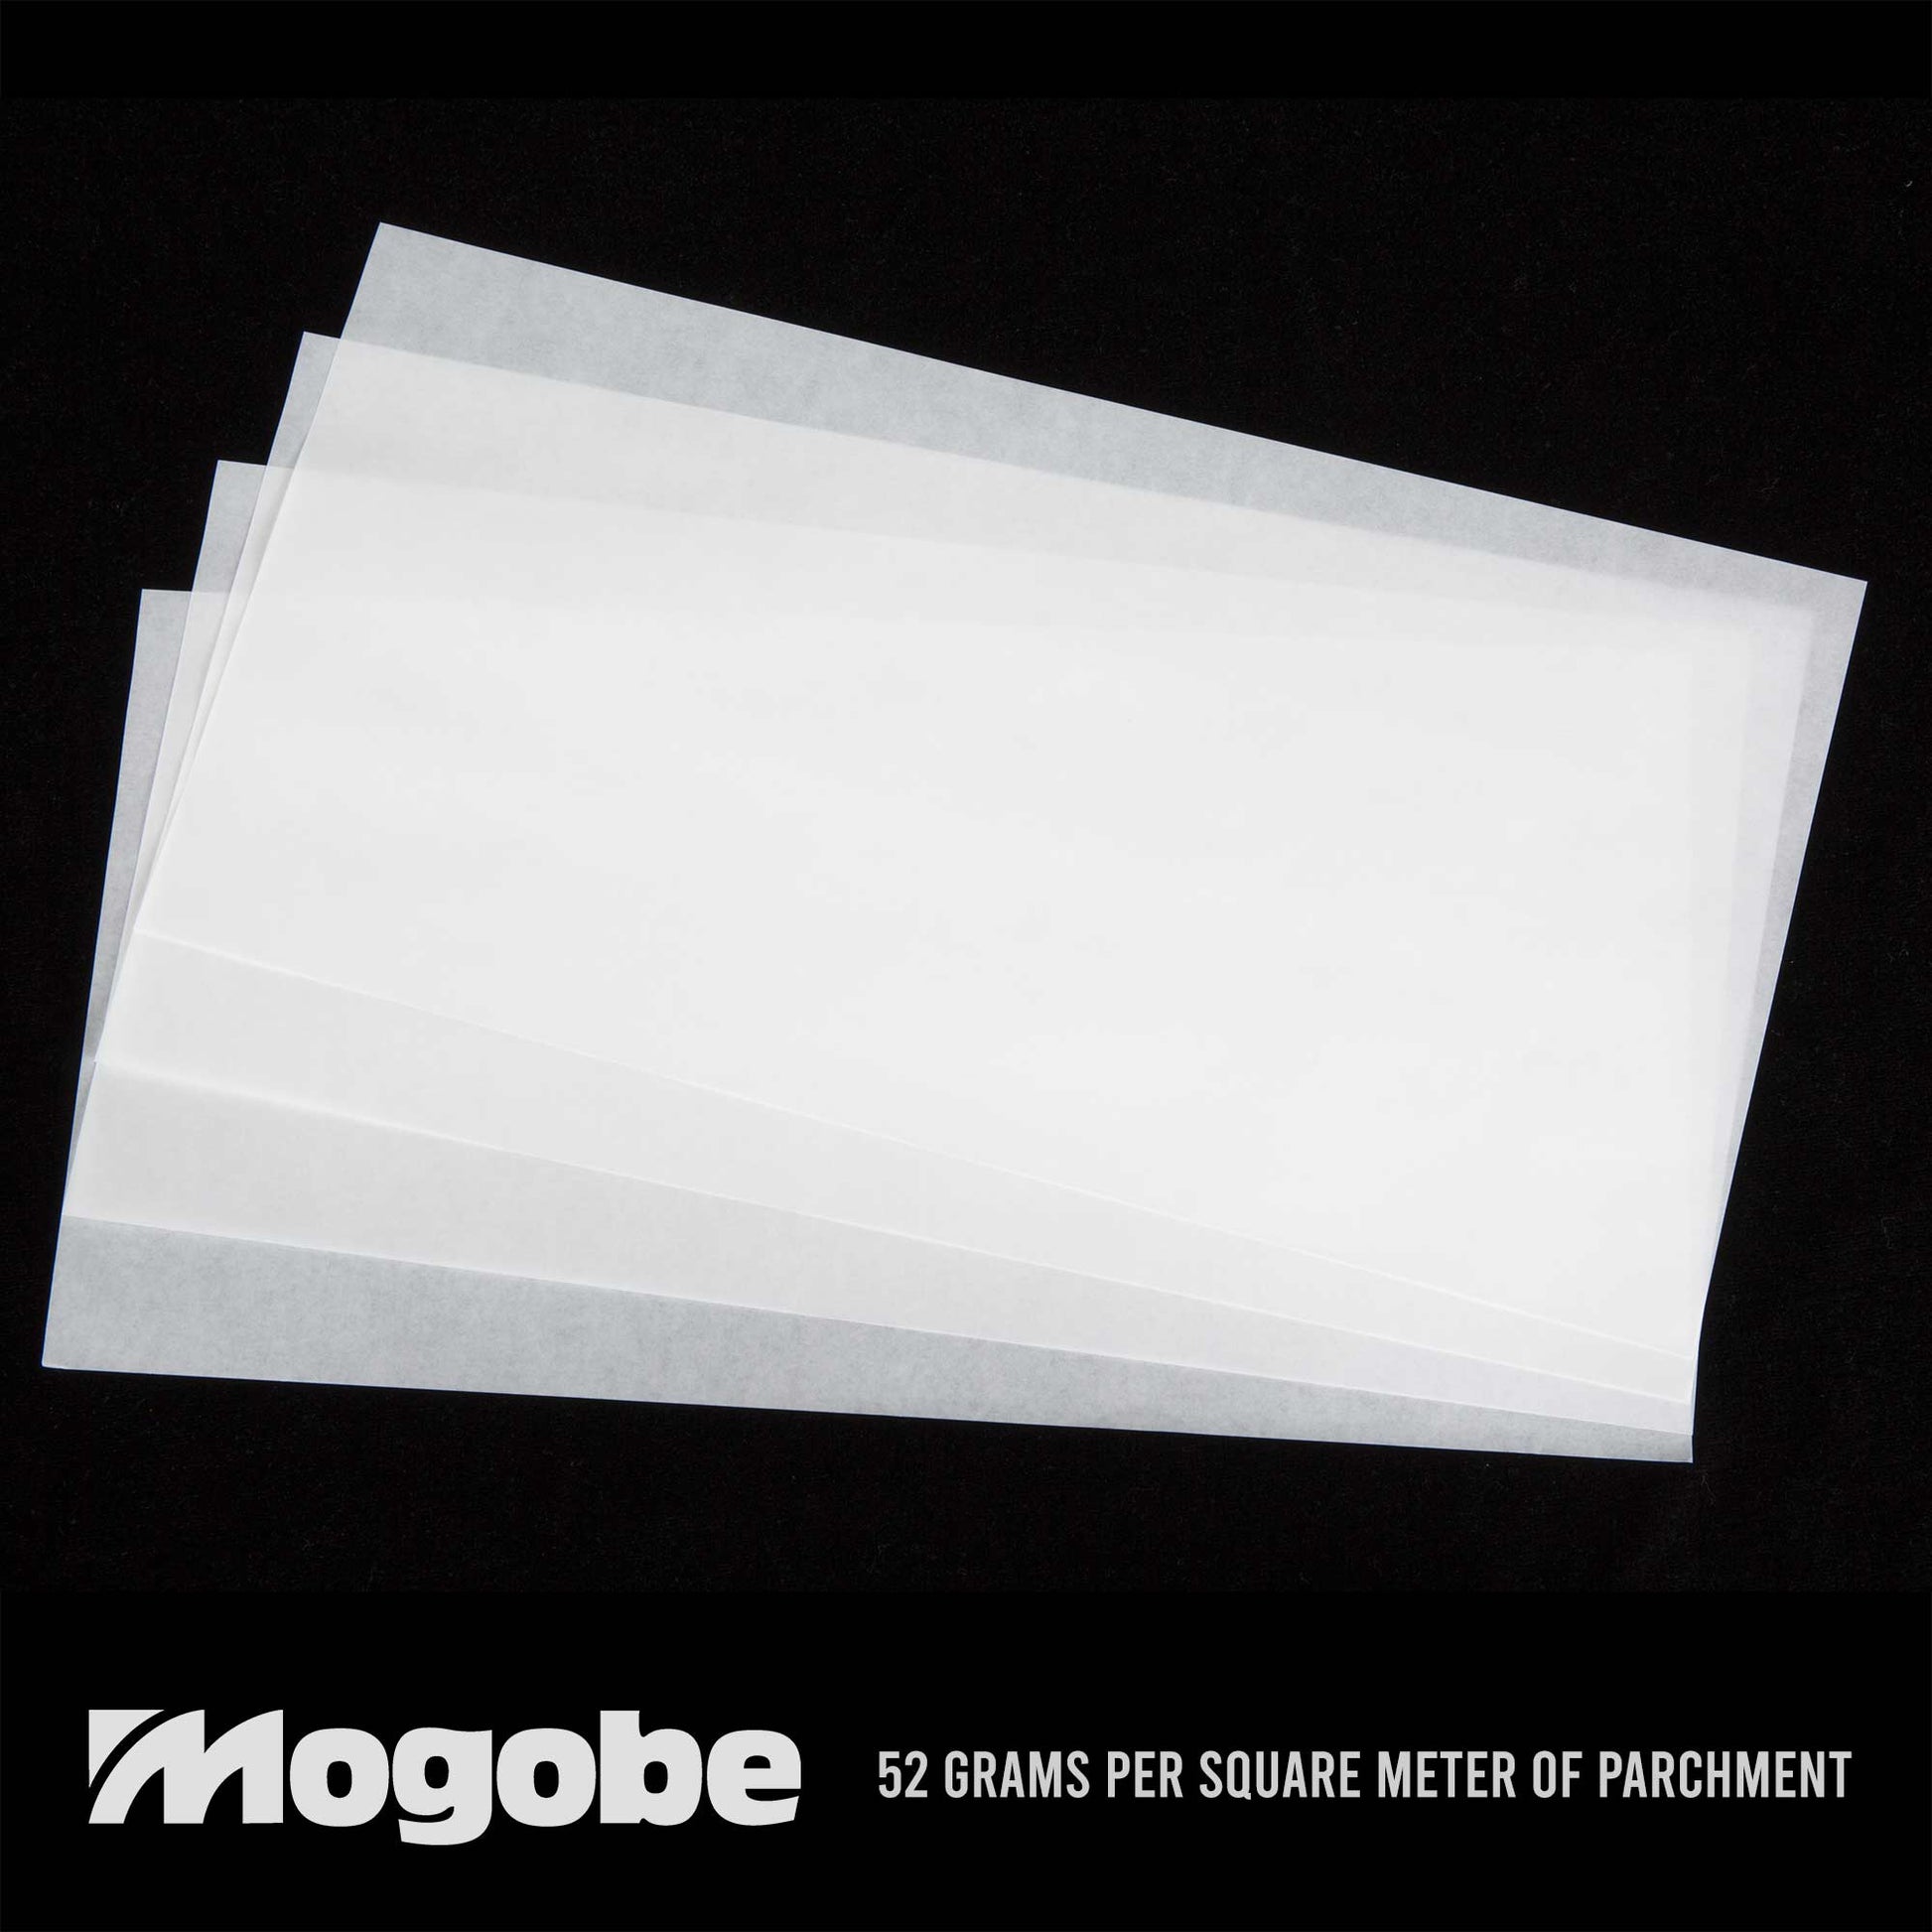 6 x 12 Inches Parchment Paper, 2-Side Coating, Heat Press&Scrapers Friendly, 100 Sheets, by Mogobe